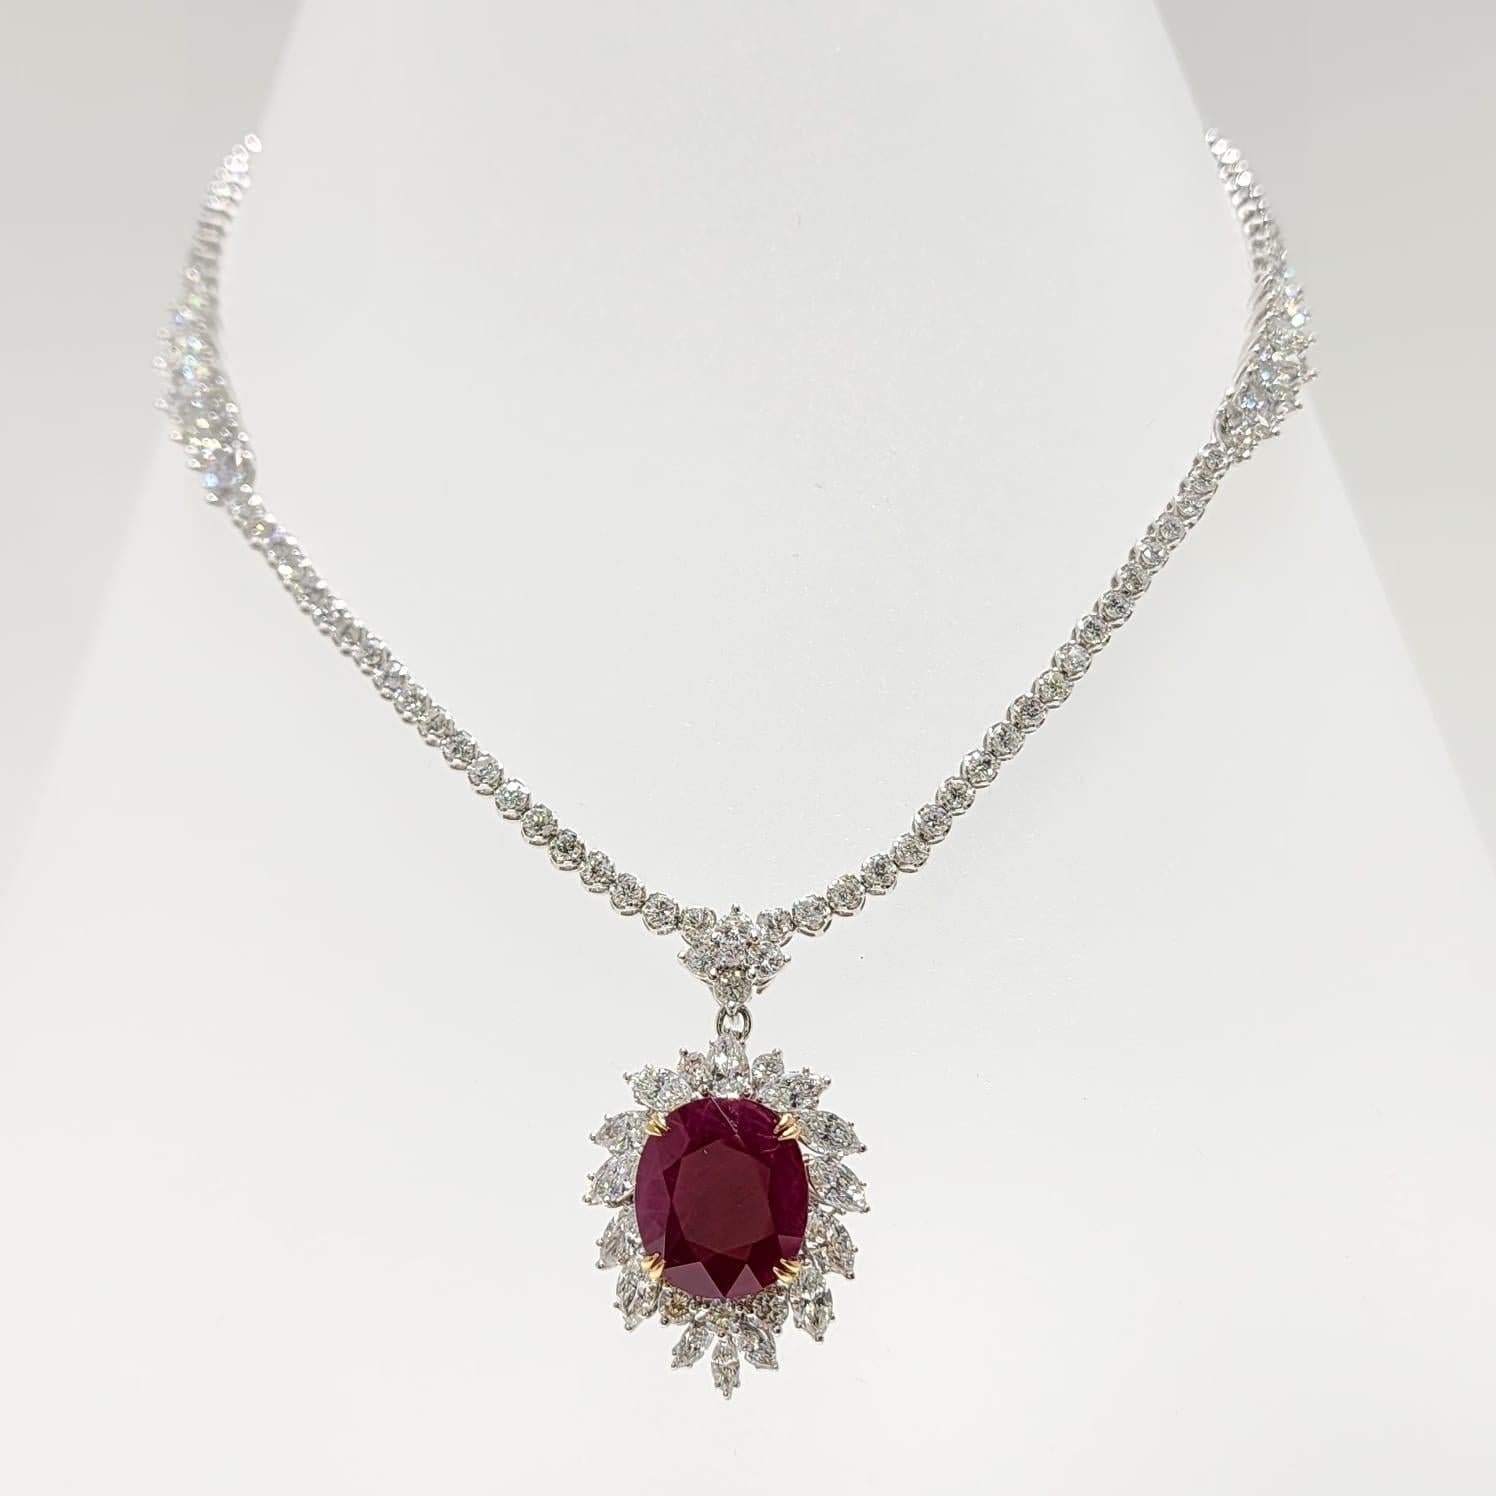 Contemporary 8.61 Carat Burma Ruby Diamond Necklace in 18 Karat White Gold For Sale